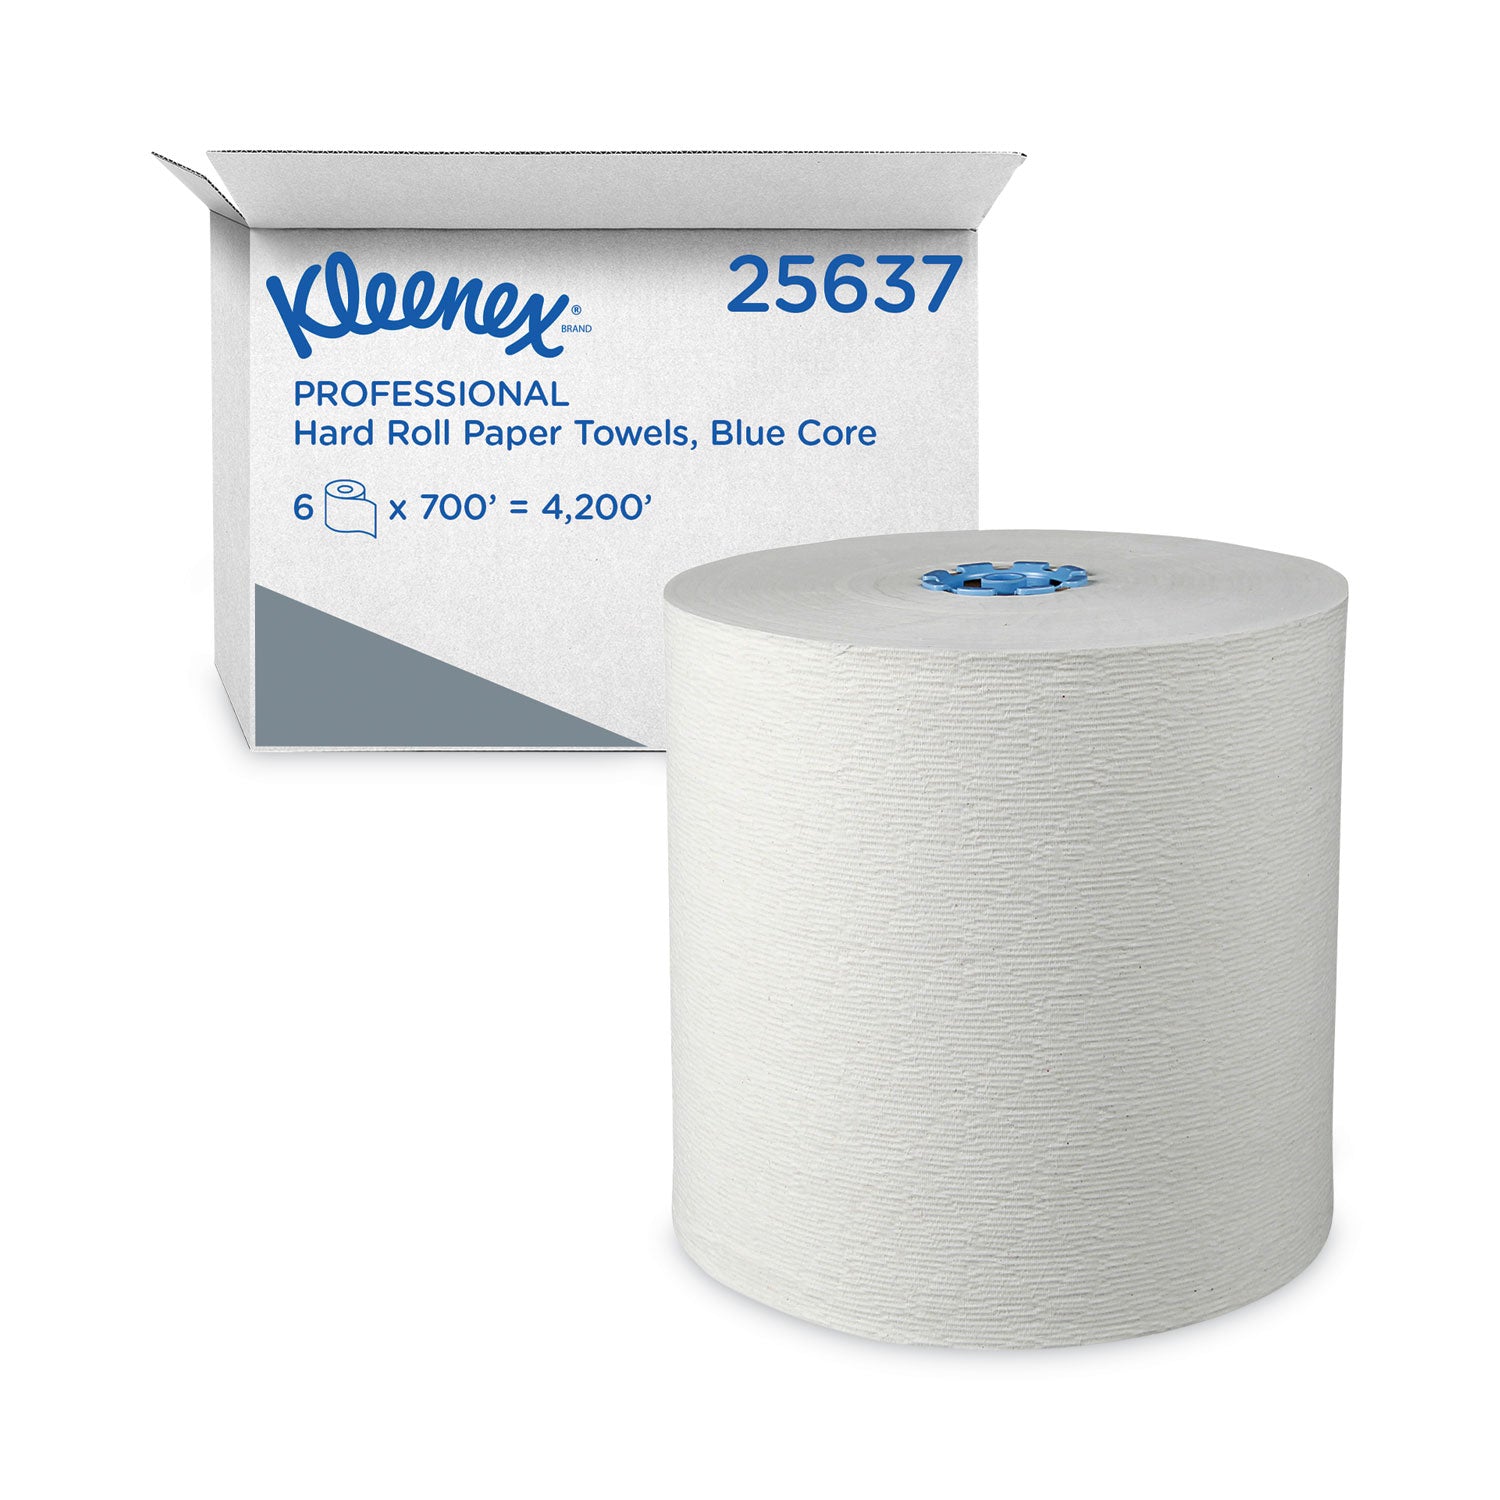 hard-roll-paper-towels-with-premium-absorbency-pockets-with-colored-core-blue-core-1-ply-75-x-700-ft-white-6-rolls-ct_kcc25637 - 1